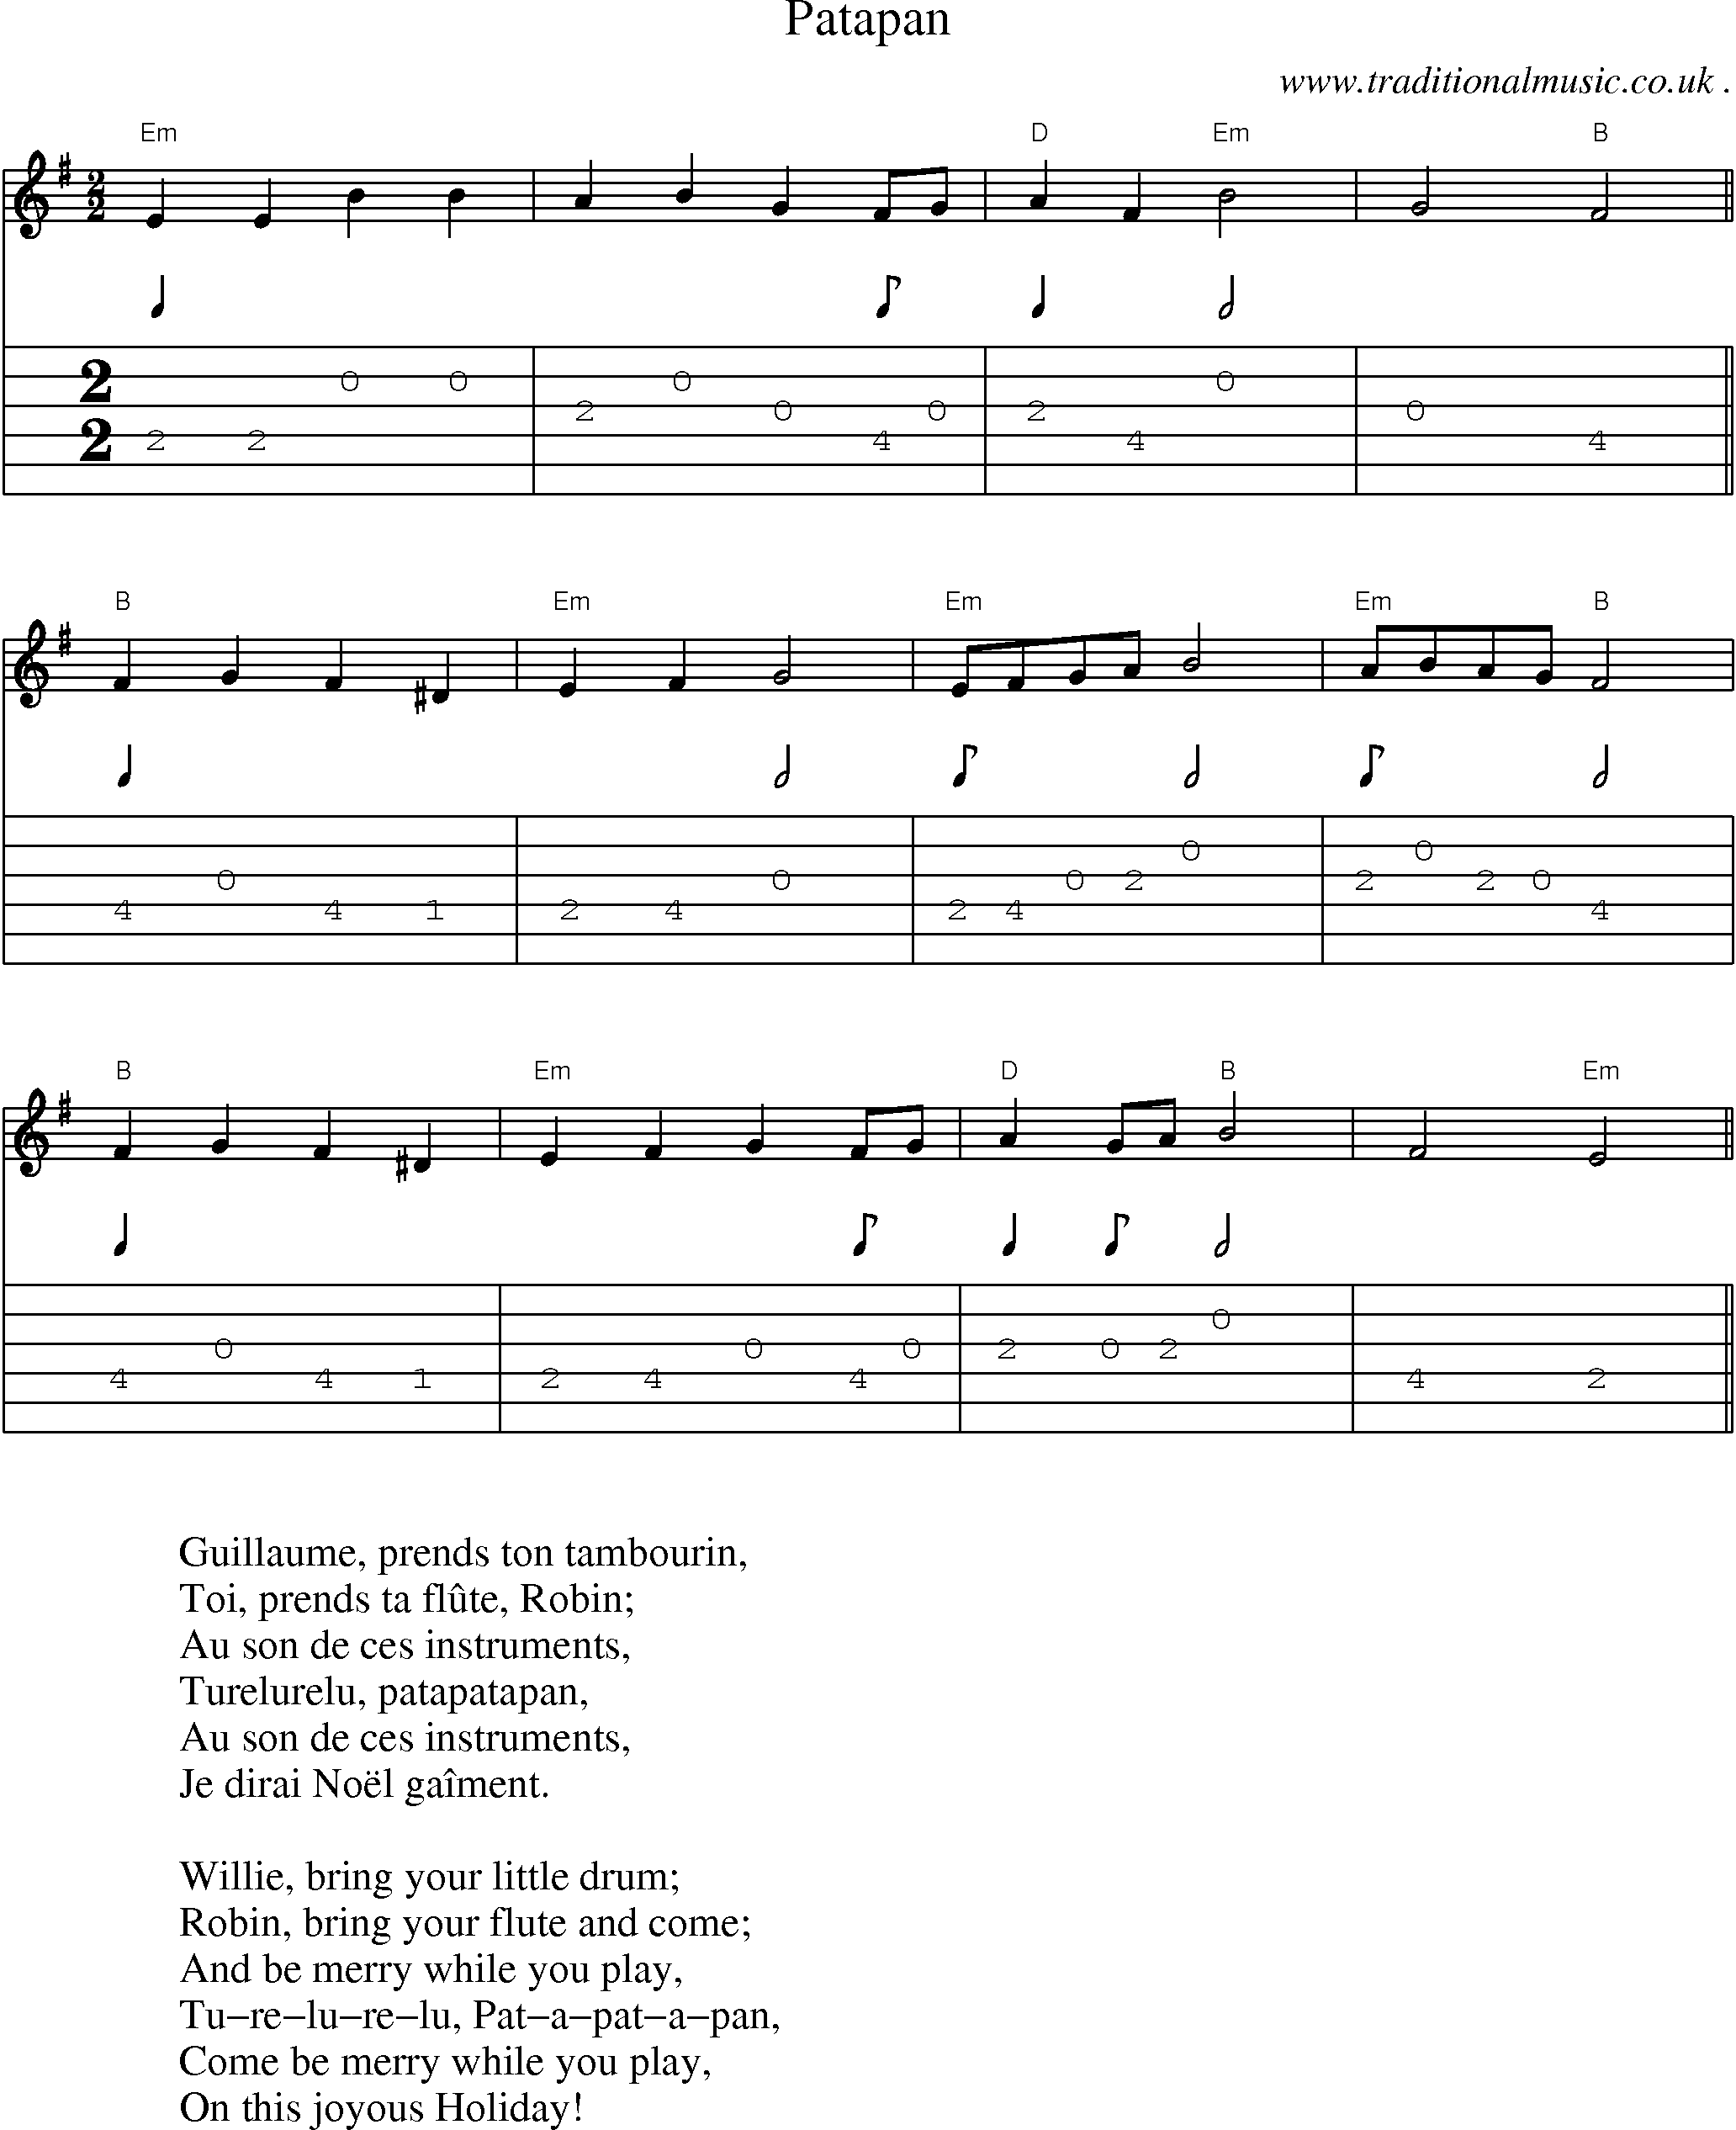 Music Score and Guitar Tabs for Patapan